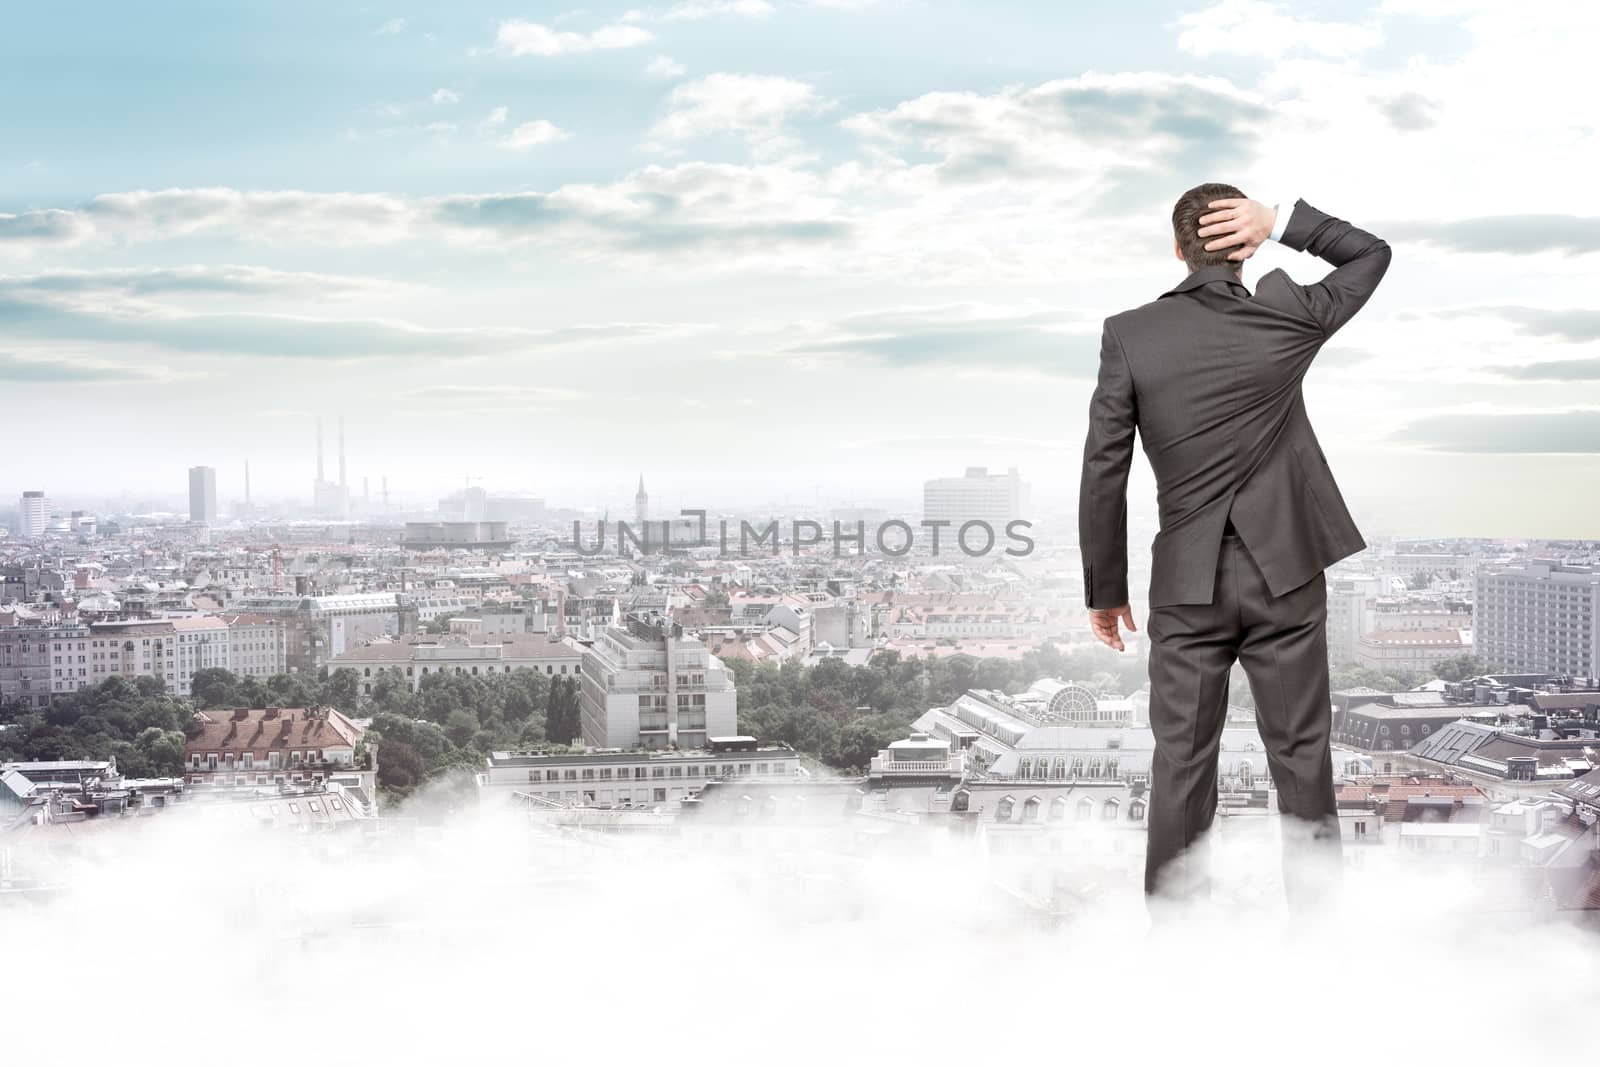 Businessman standing on clouds looking at city, rear view